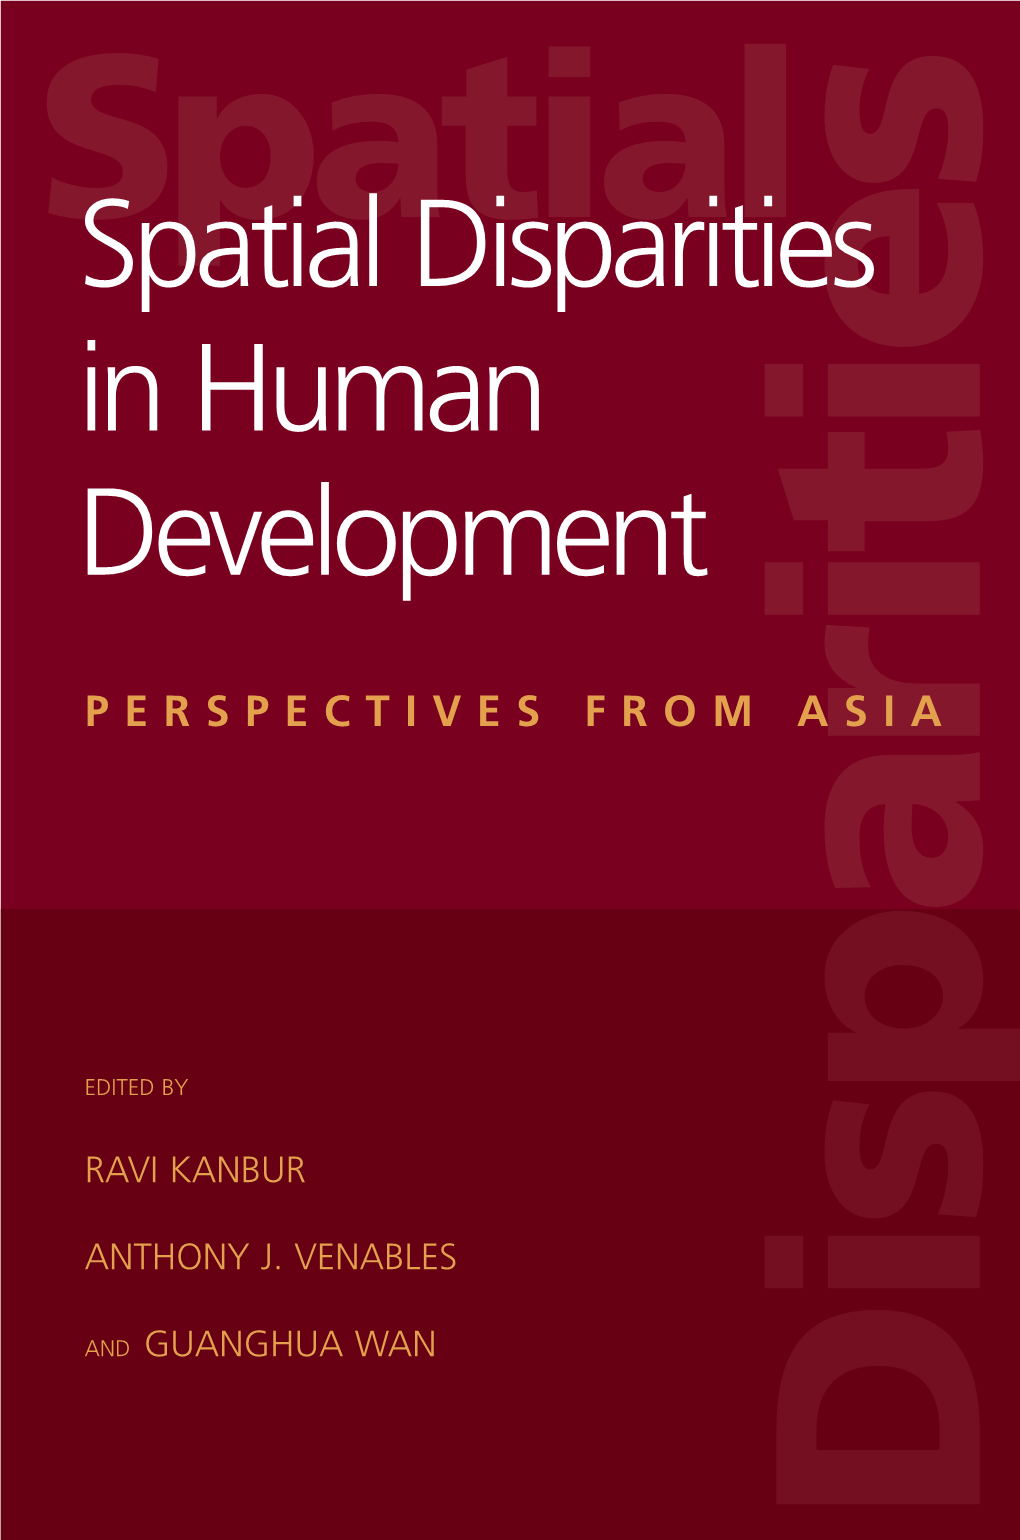 Spatial Disparities in Human Development: Perspectives from Asia